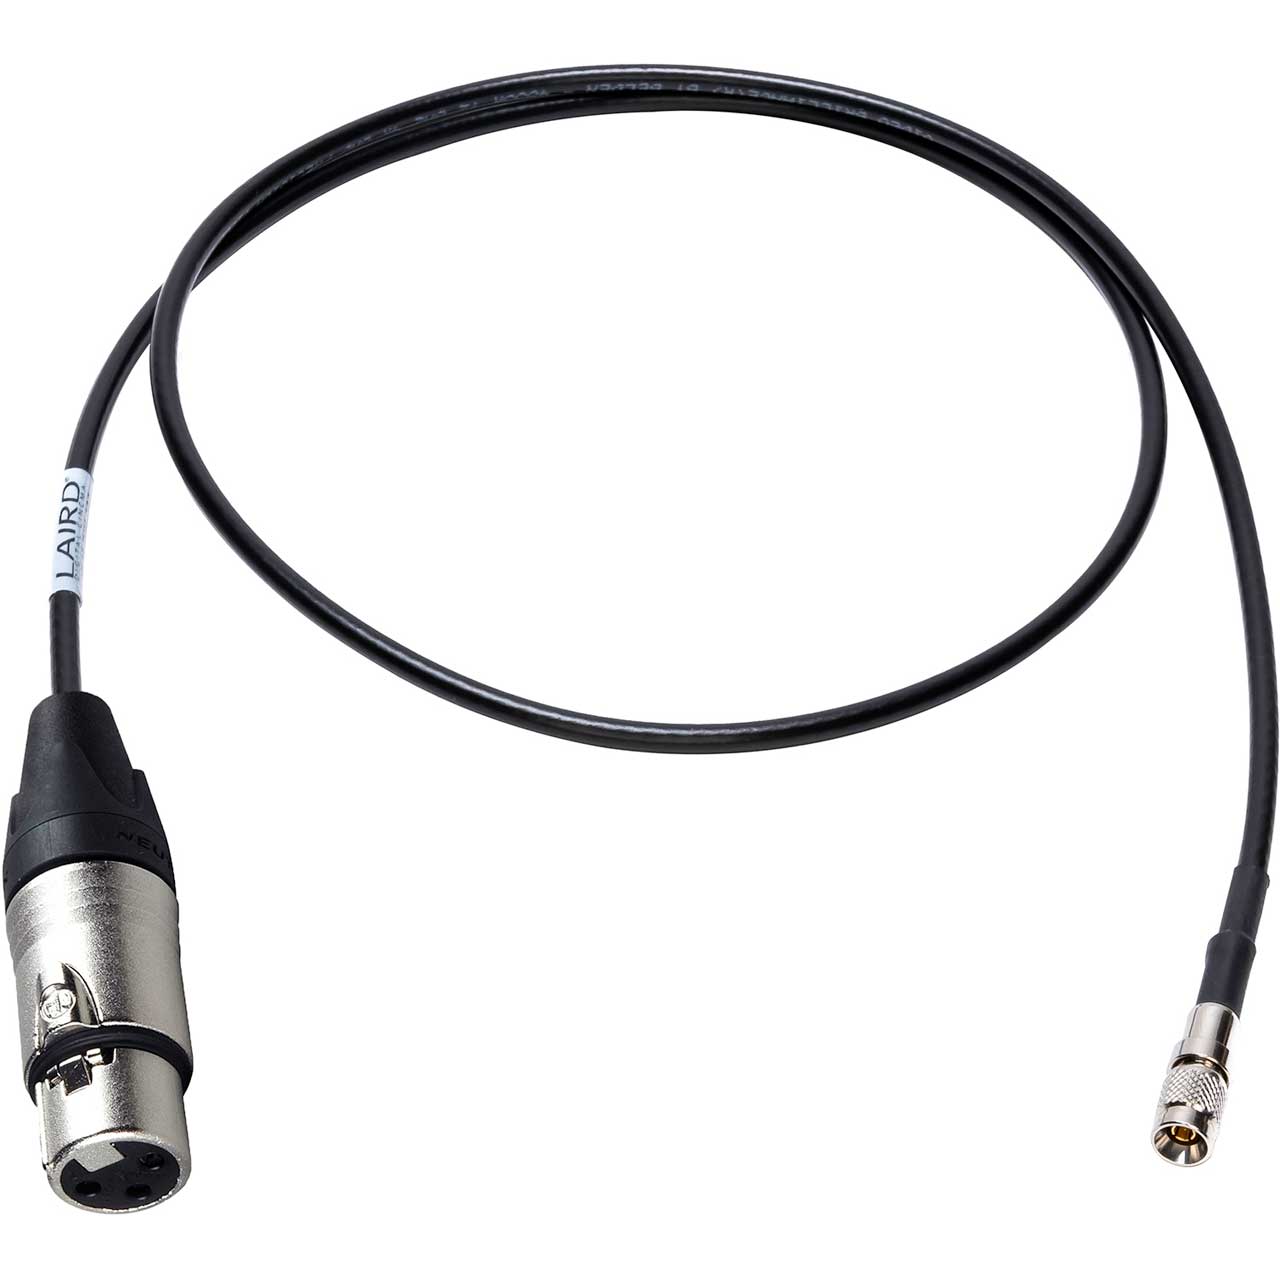 Laird XLF-DIN-010 DIN 1.0/2.3 to XLR-M Time Code Cable - 10 Foot XLF-DIN-010